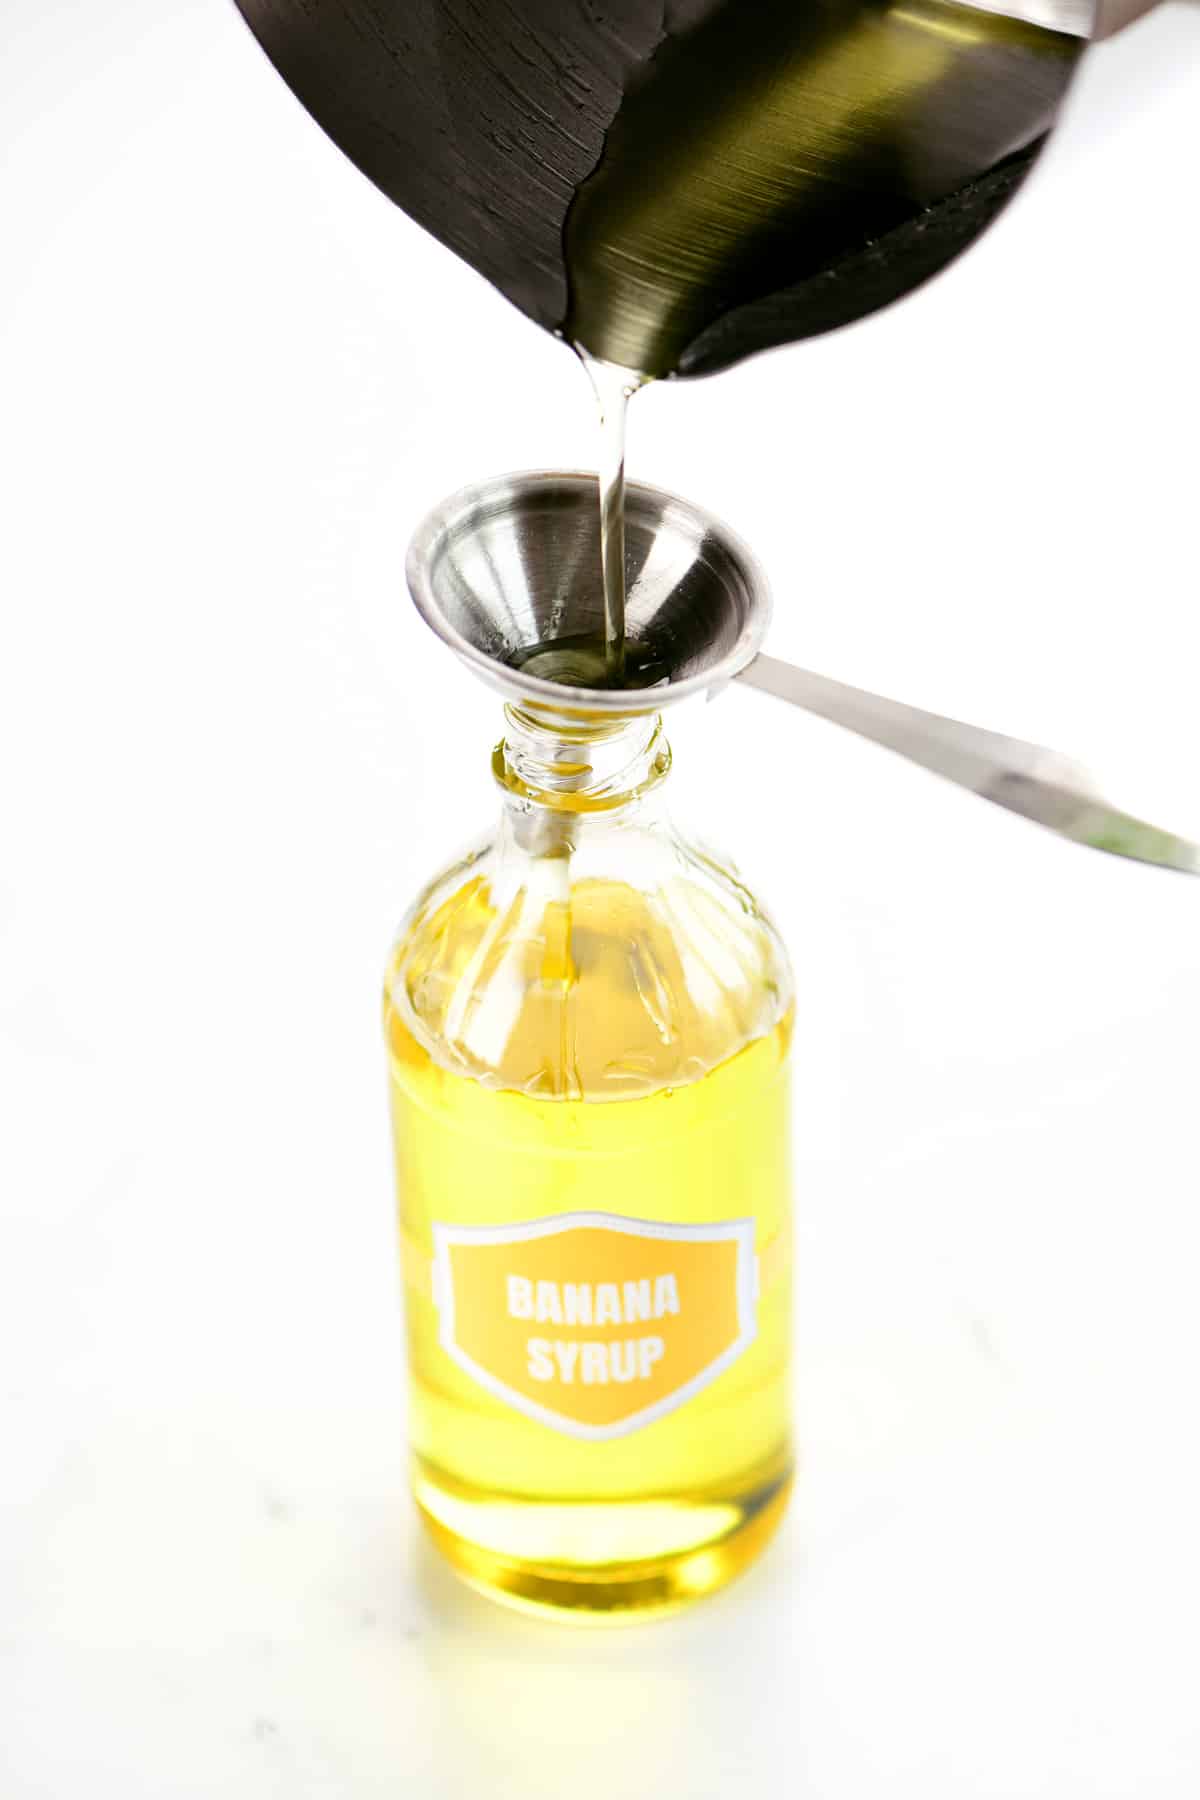 Pouring cooled banana syrup into a bottle.